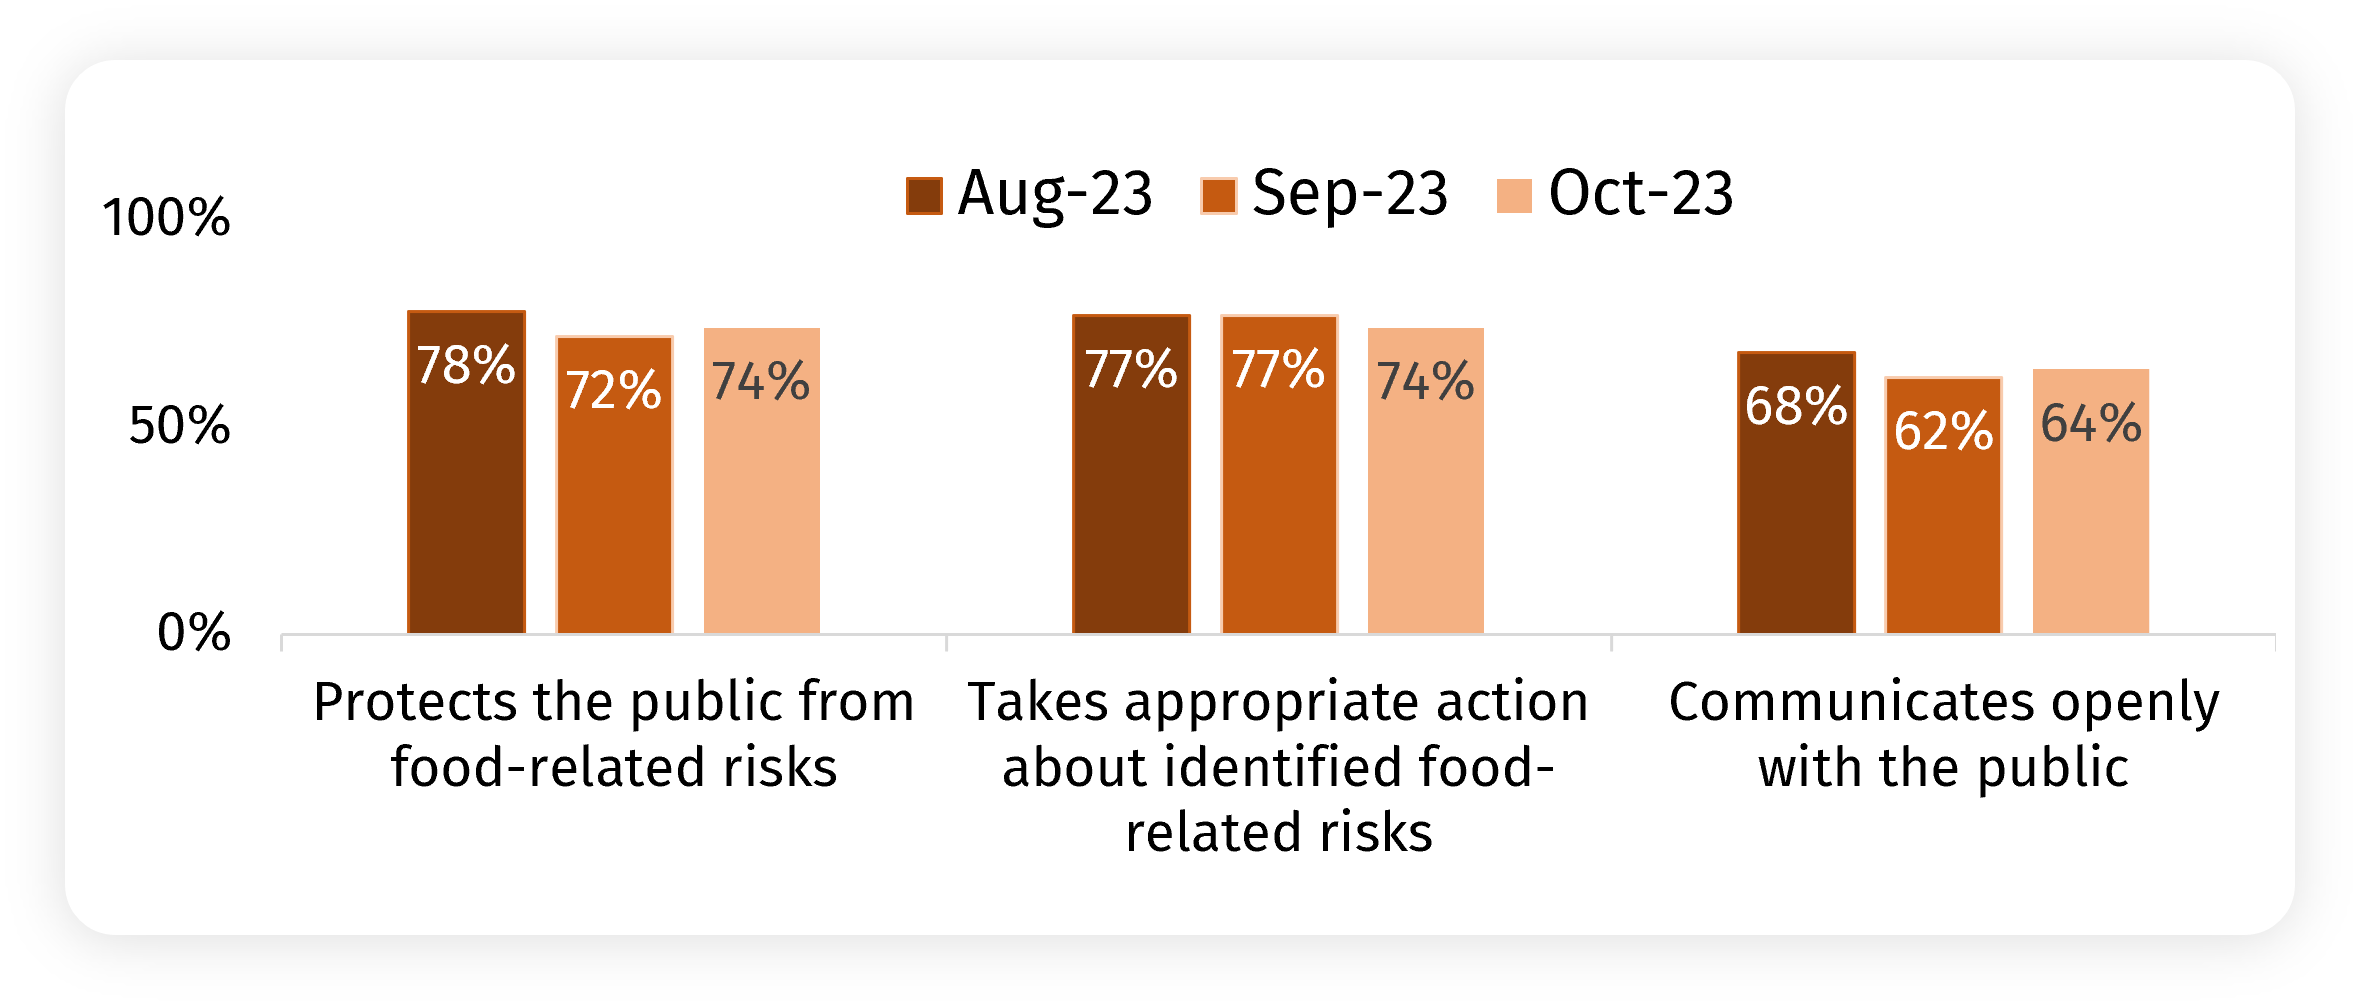 The chart shows confidence that the FSA protects the public, takes appropriate action and communicates openly among those with at least some knowledge of the FSA, from August to October 2023. 74% are confident that the FSA protects the public from food-related risks and takes appropriate action about identified food-related risks. 64% say that the FSA communicates openly with the public.